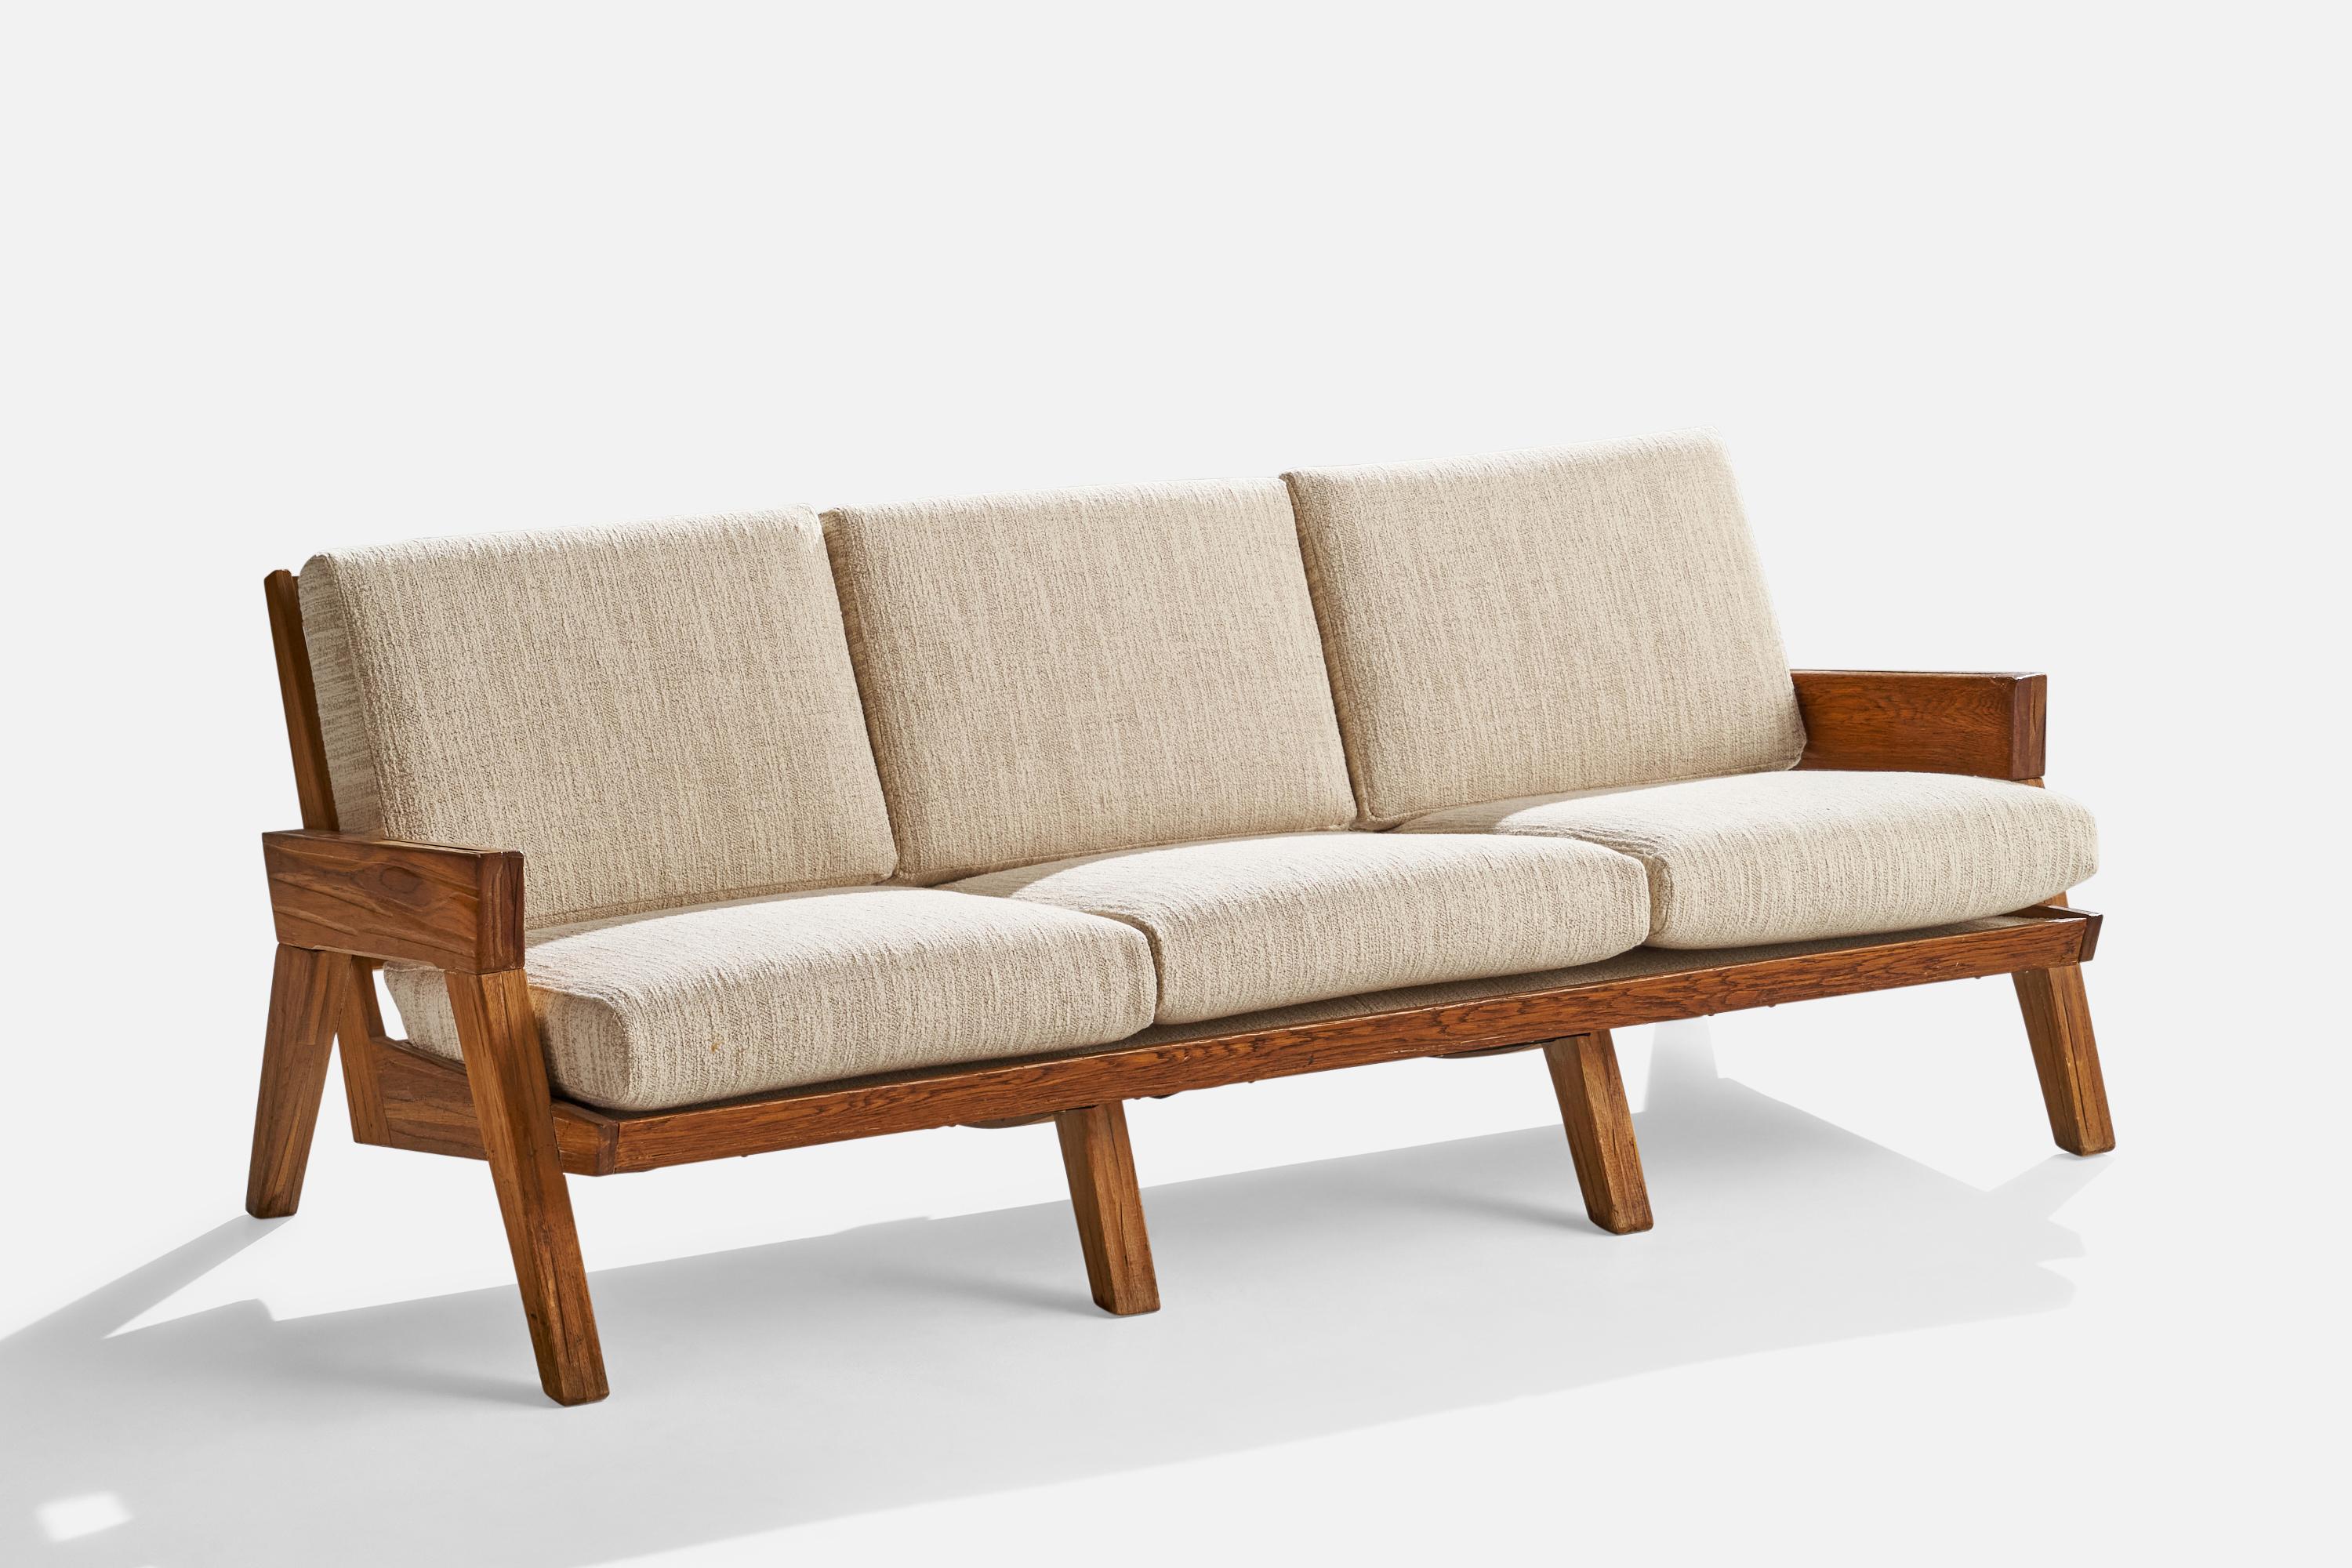 A cerused oak and off-white fabric sofa designed and produced by A. Brandt Ranch Oak, USA, c. 1950s.

Seat height 16”